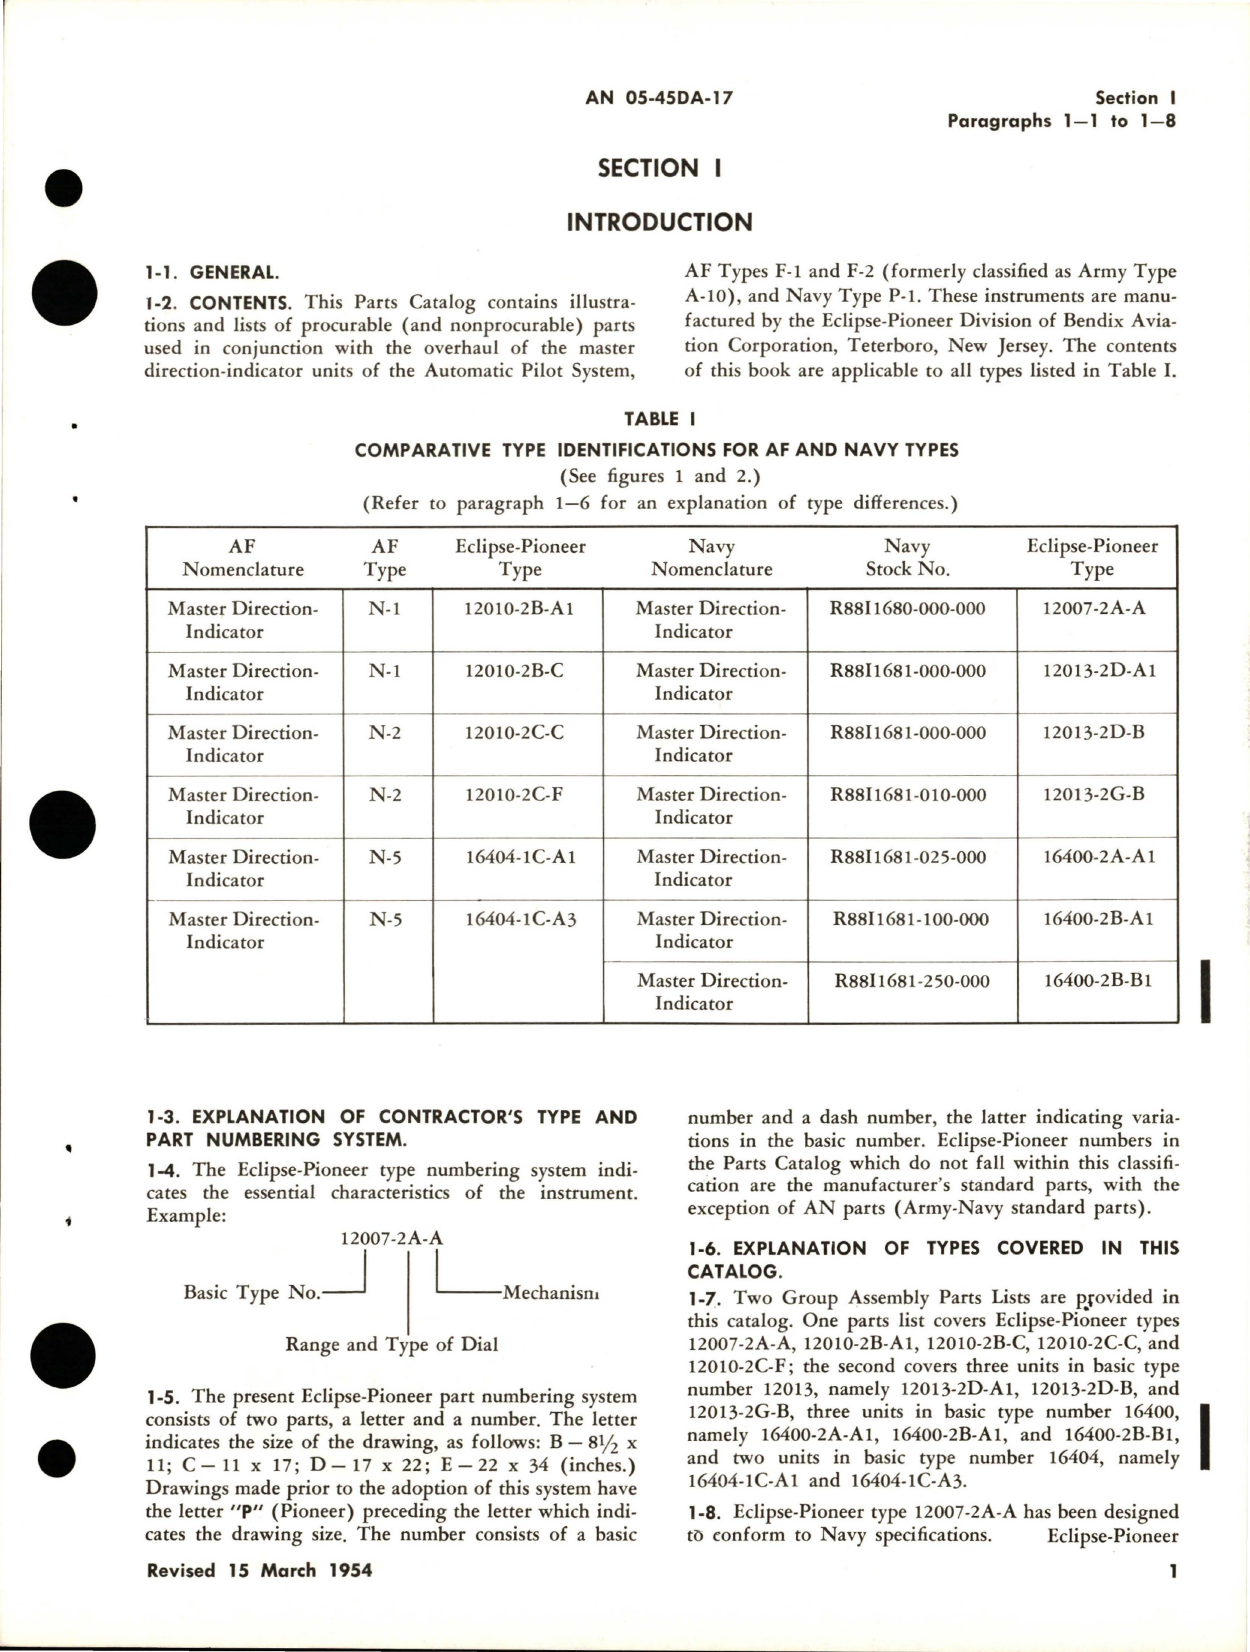 Sample page 5 from AirCorps Library document: Parts Catalog for Master Direction Indicators